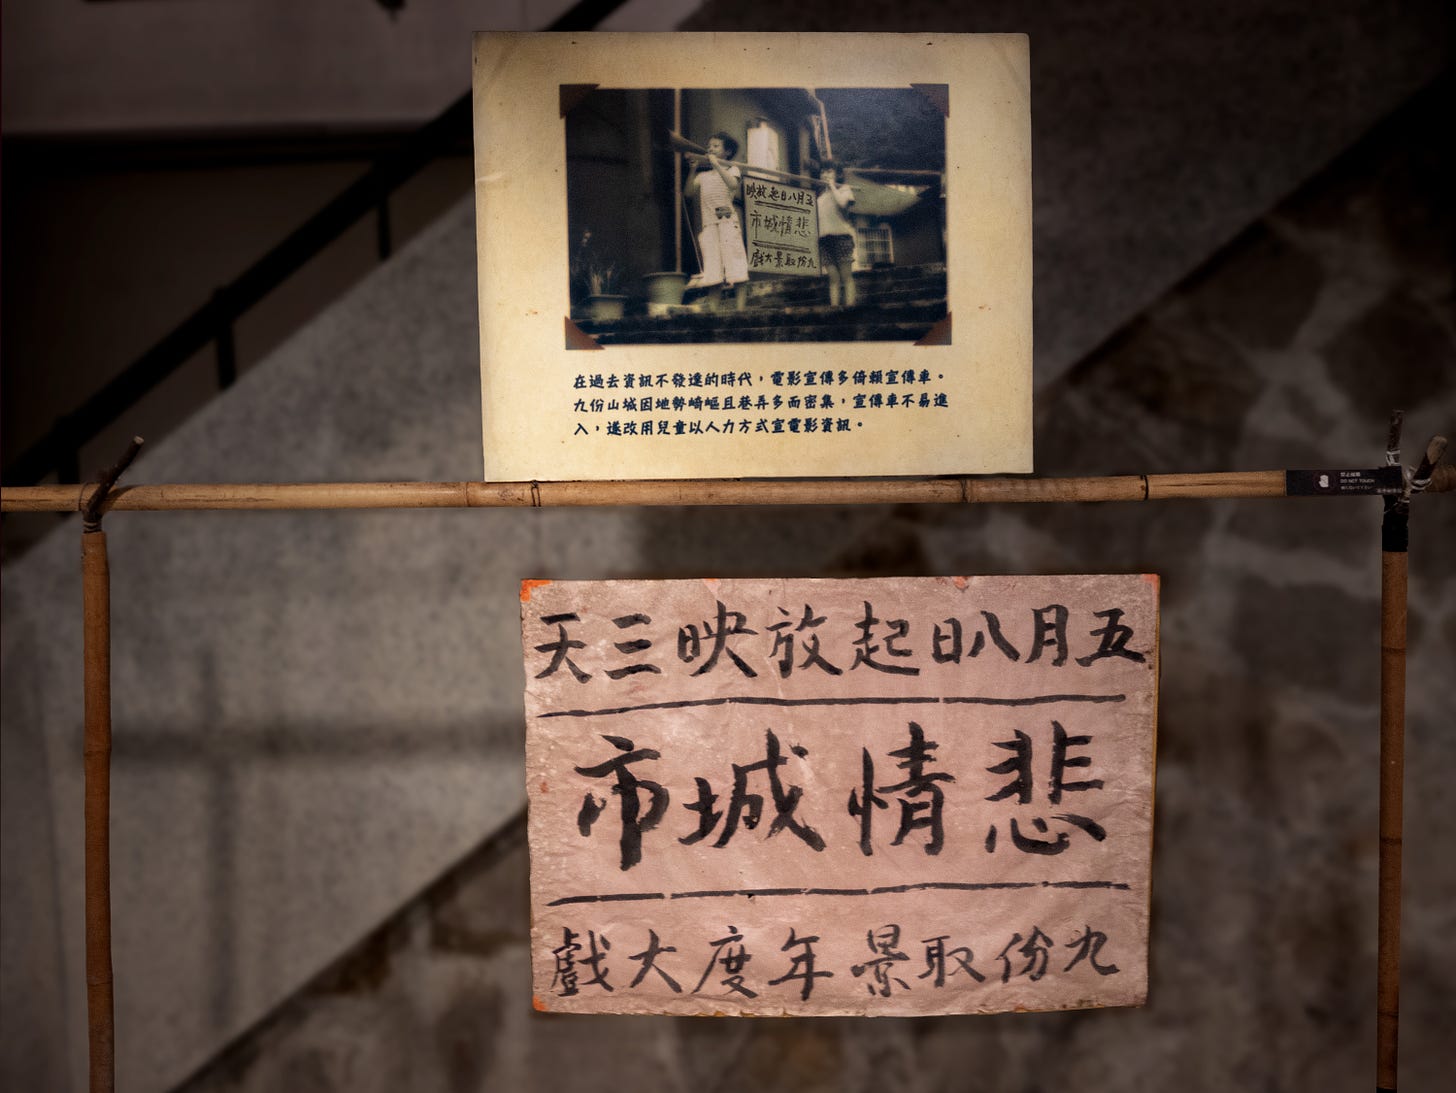 The original handwritten sign used to advertise Hou Hsiao-hsien's "City of Sadness" at Jiufen’s Shengping Theater 昇平戲院